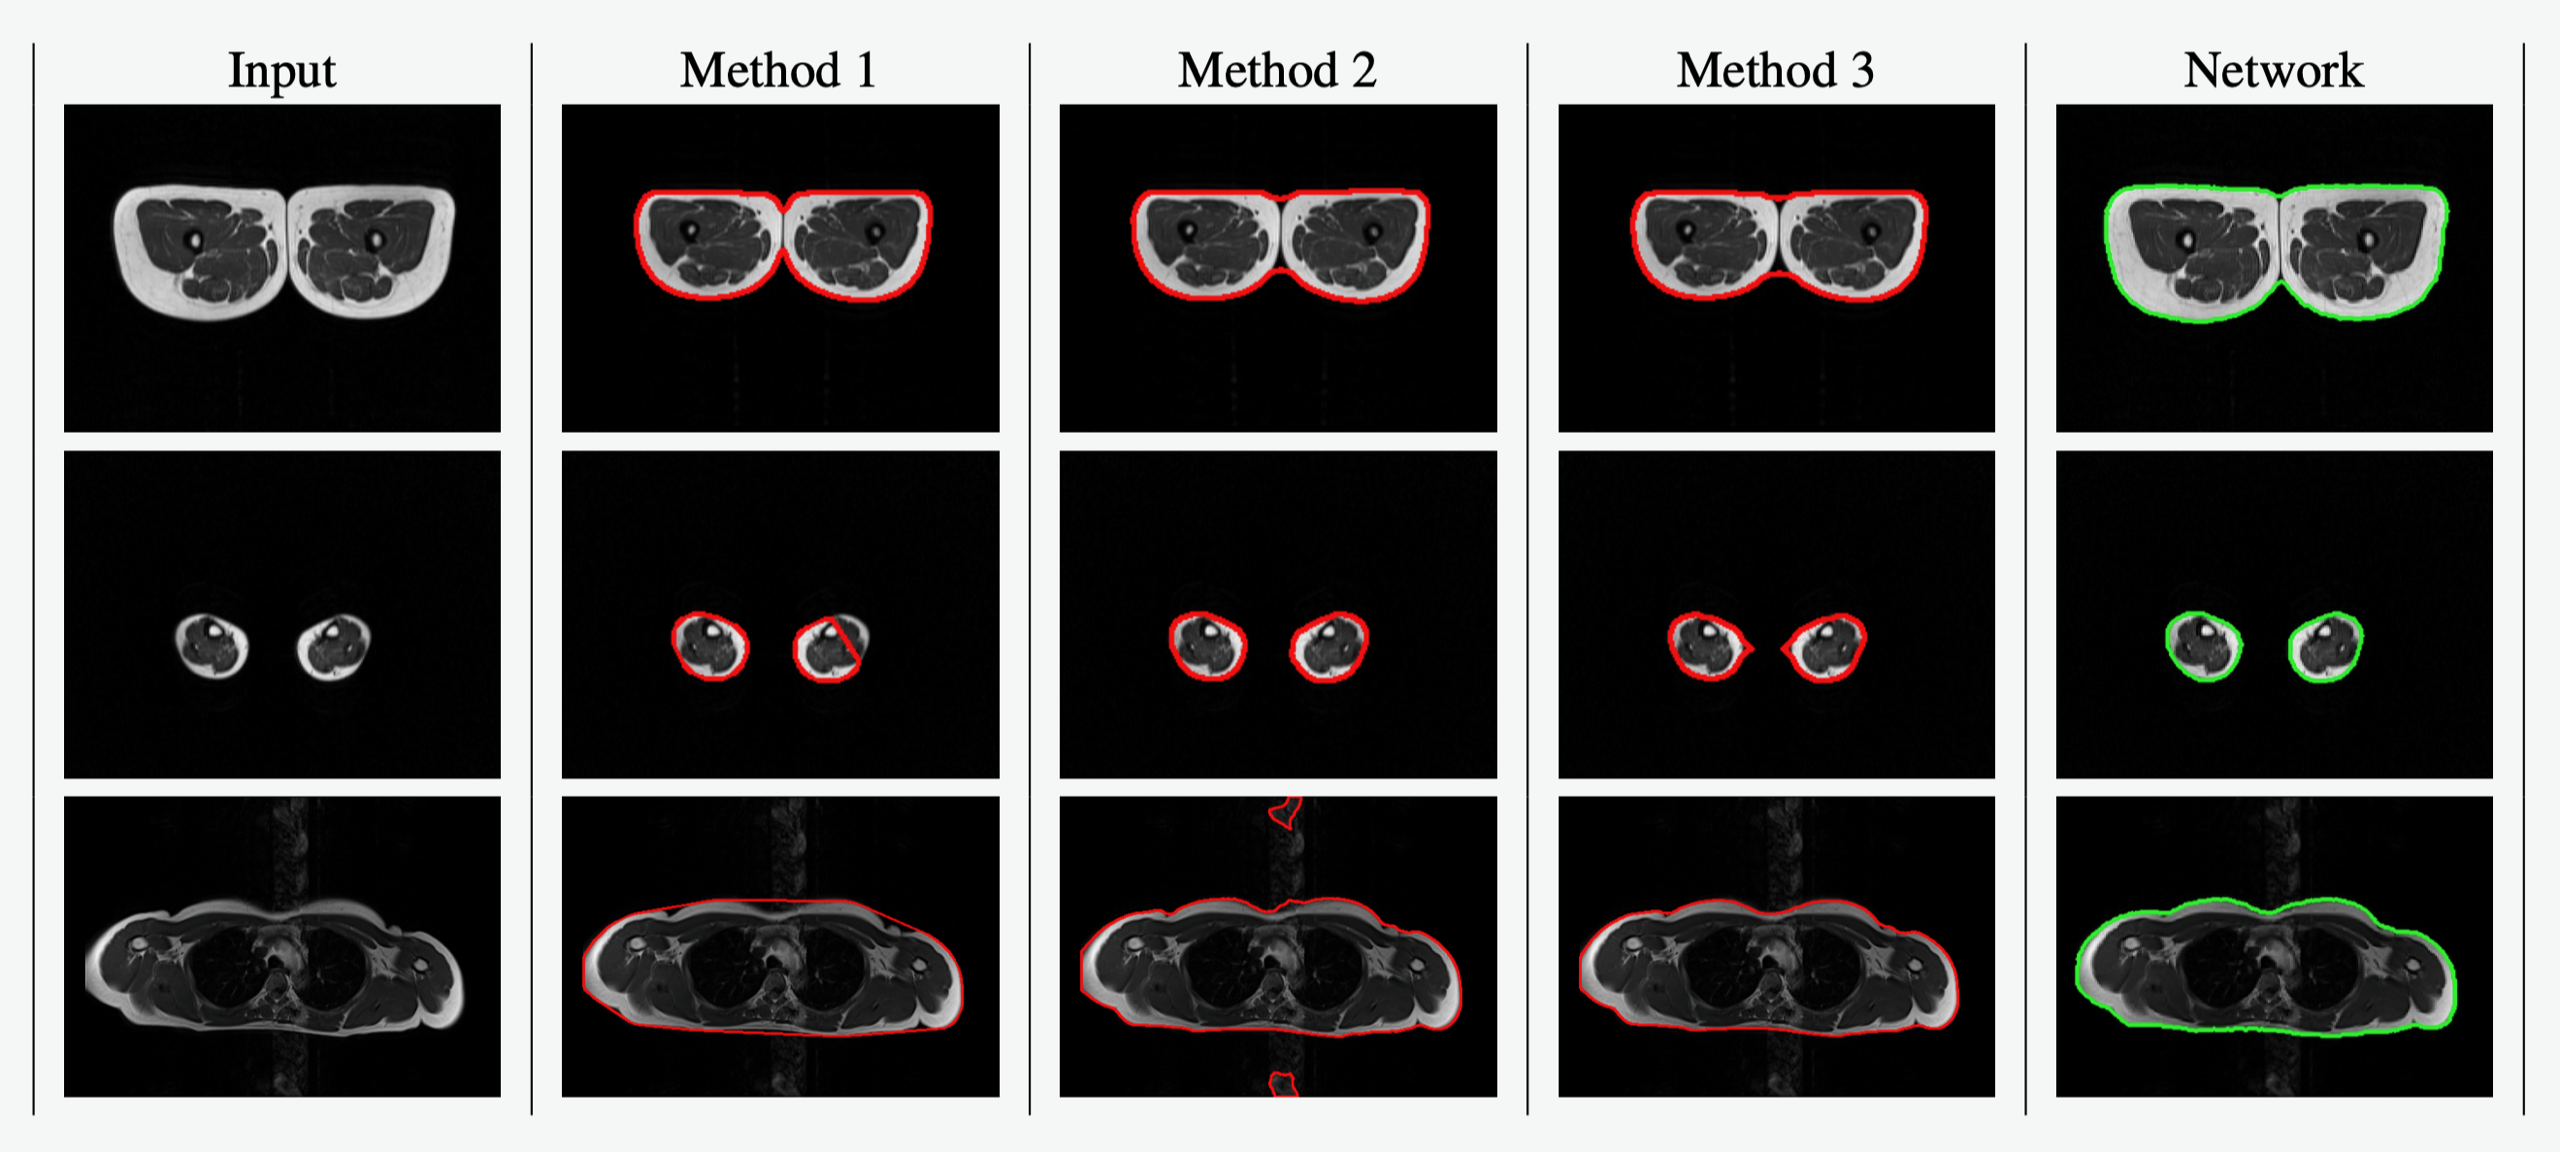 Given an MRI image, different methods obtain different segmentation candidates with good results on some configurations and errors in others. The contours of the candidate segmentations are shown in red over the input image. The trained GENTEL network gathers the right knowledge in a unified framework.